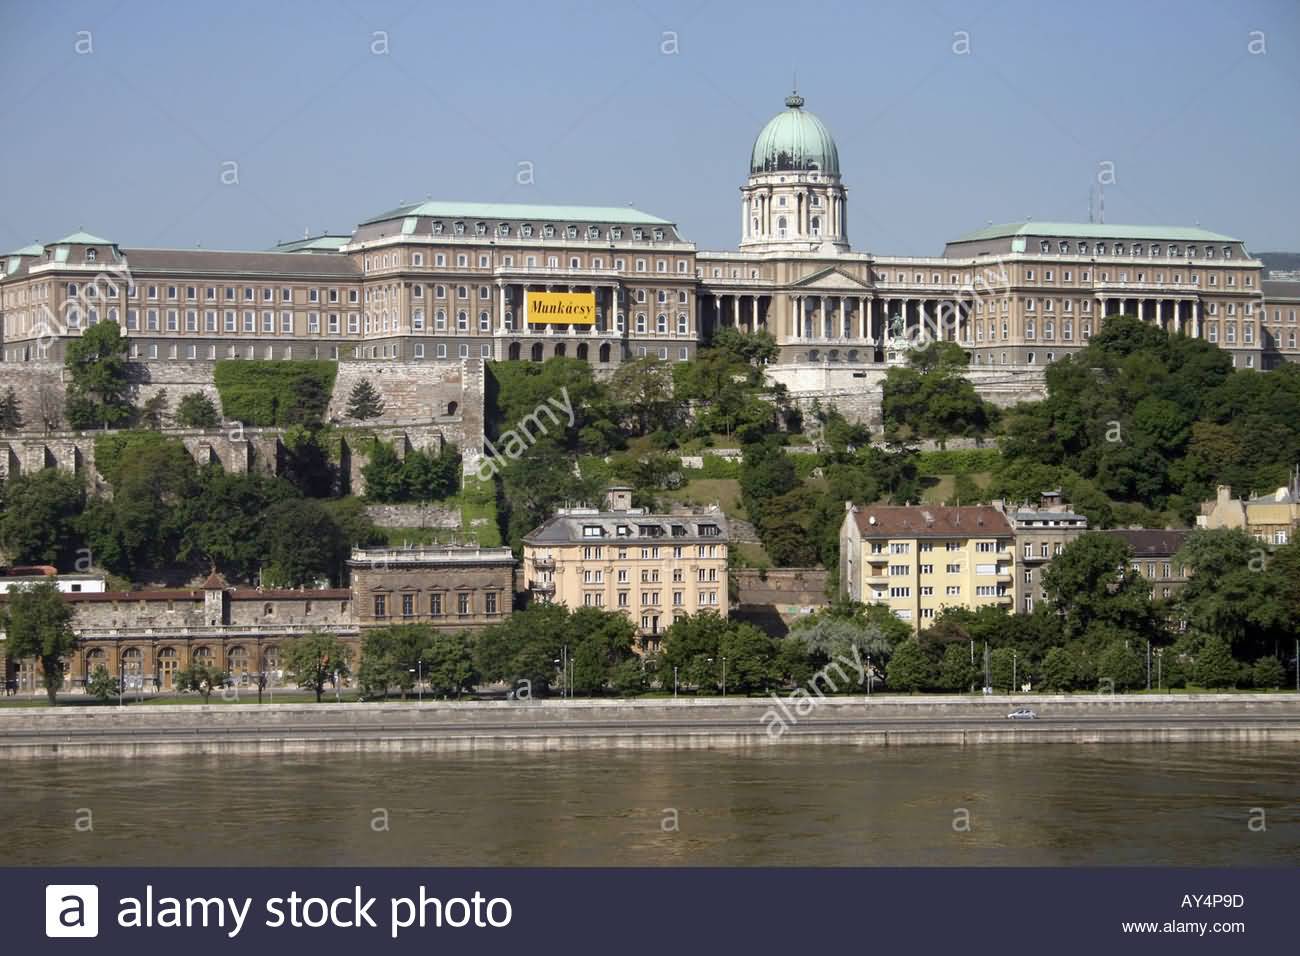 Buda Castle And Royal Palace Overlooking The Danube River In Budapest